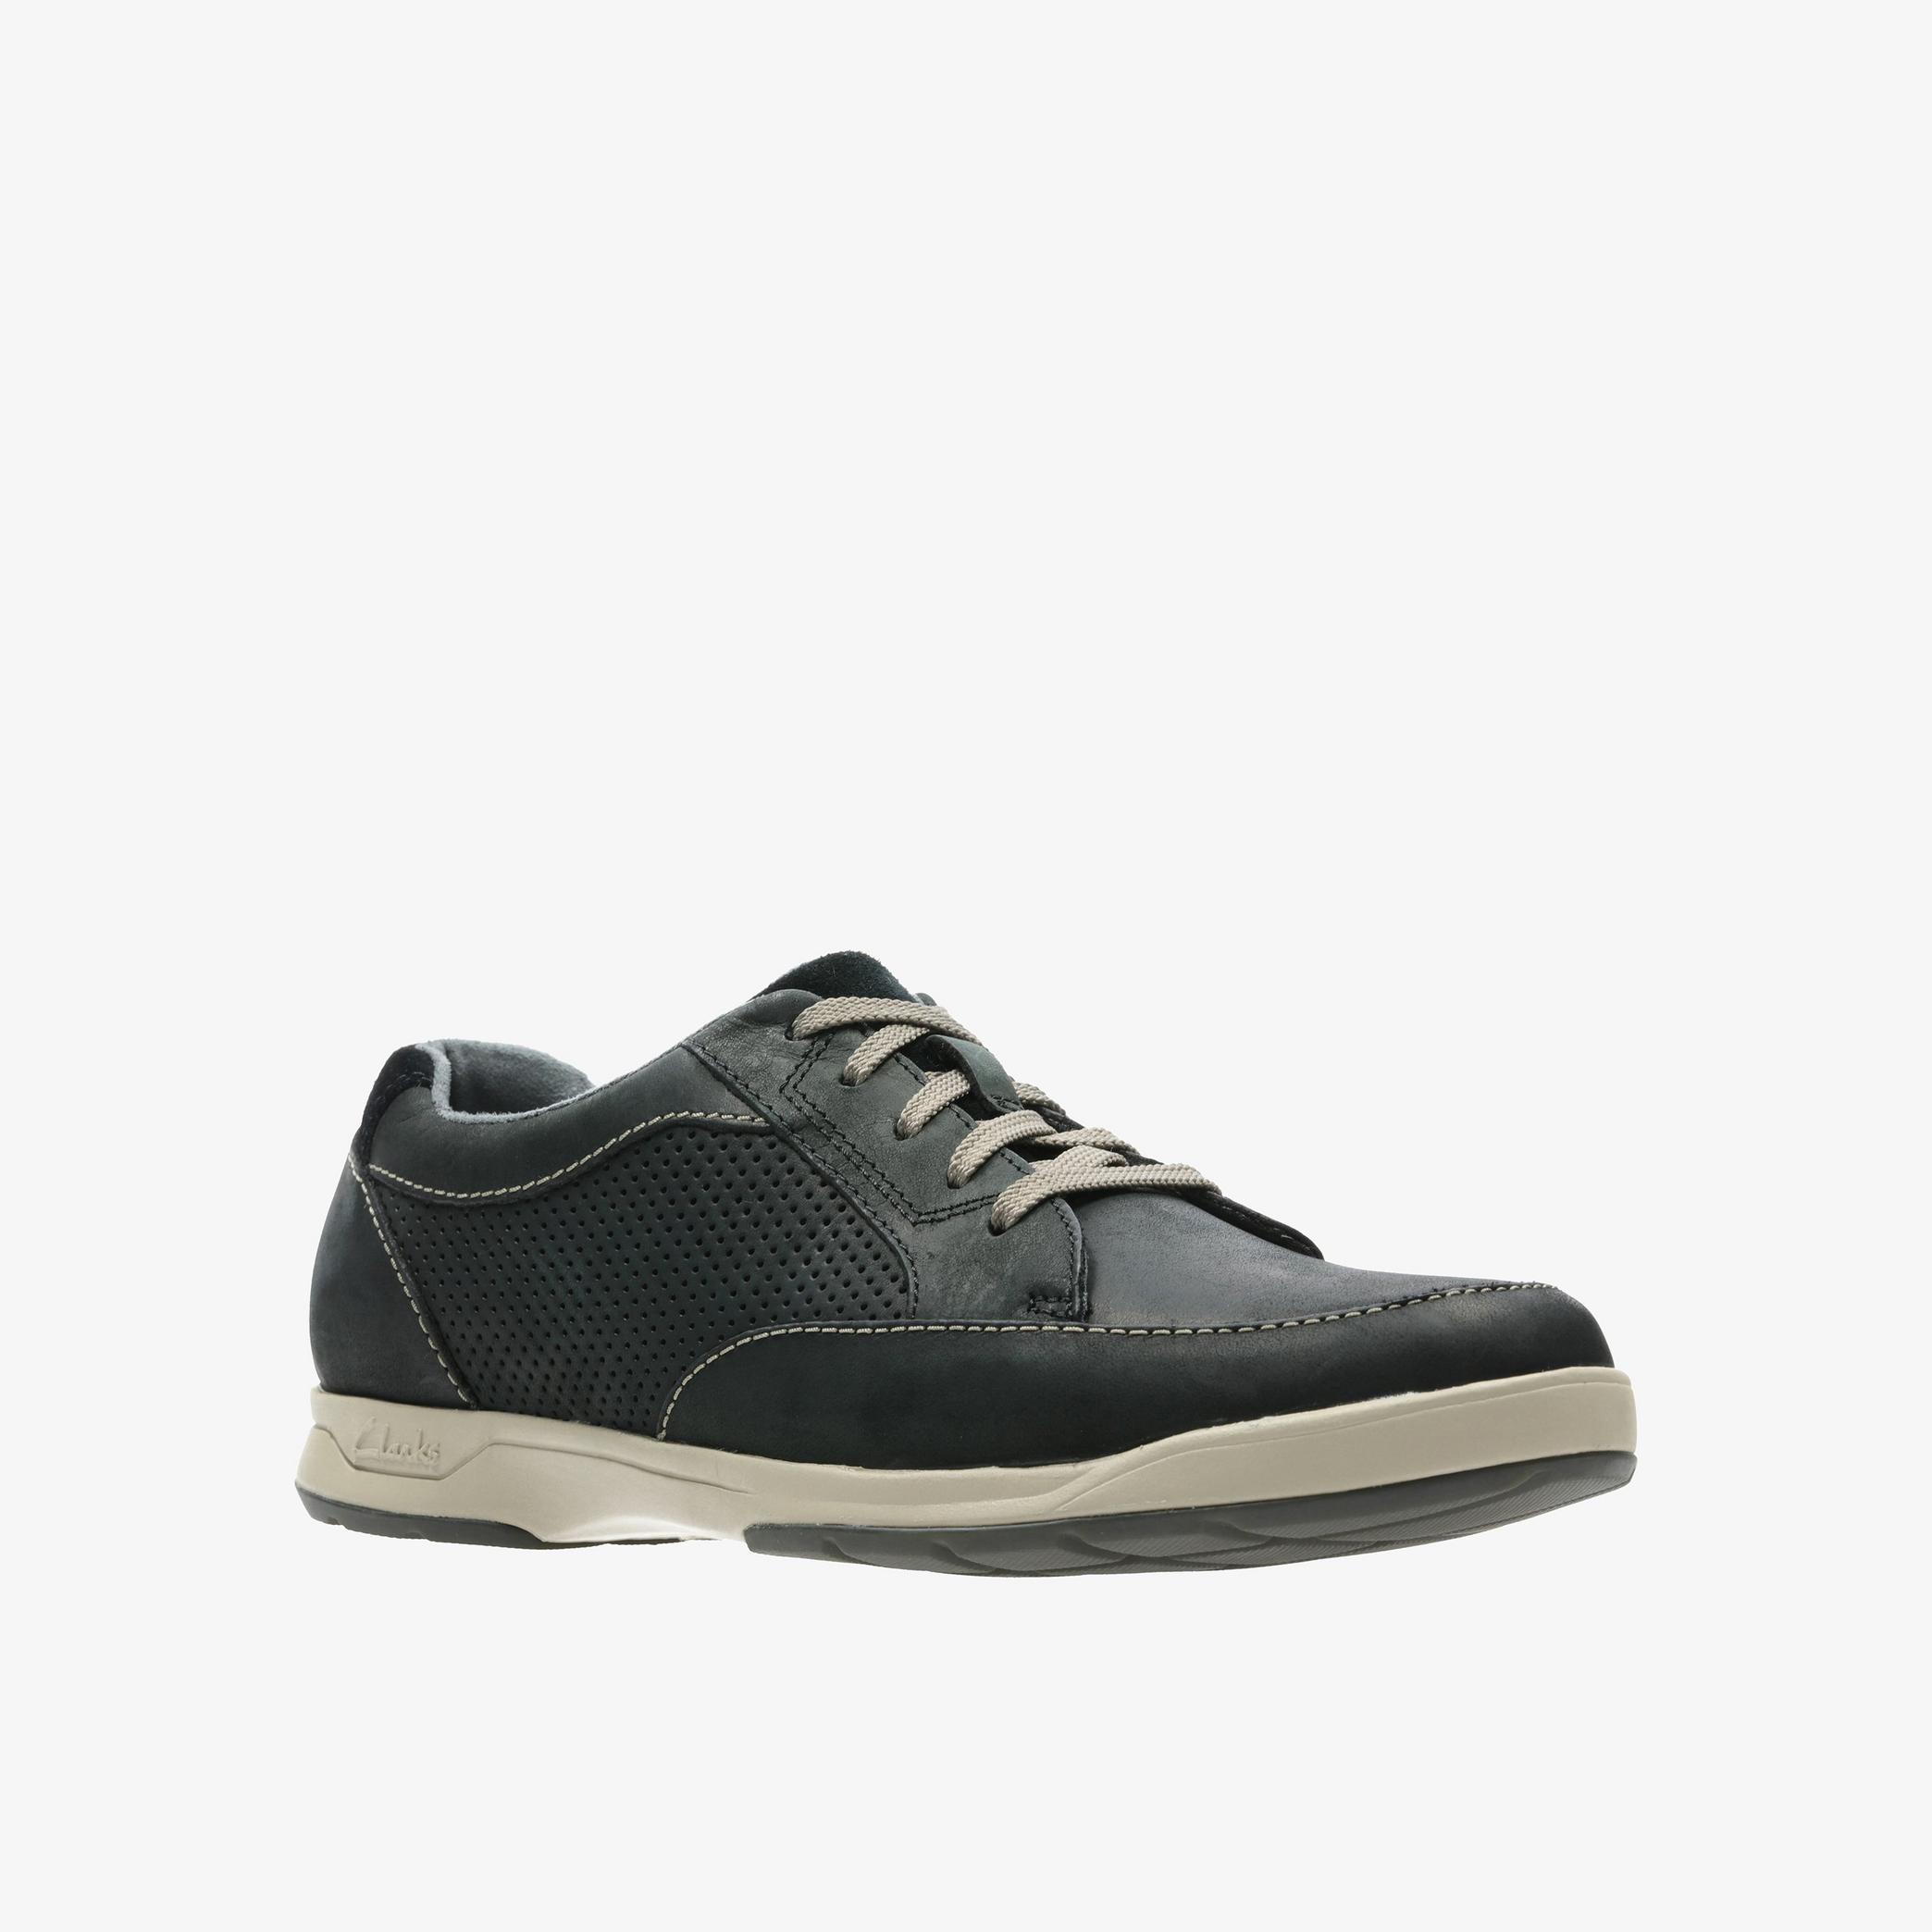 Stafford Park5 Black Nubuck Derby Shoes, view 3 of 6